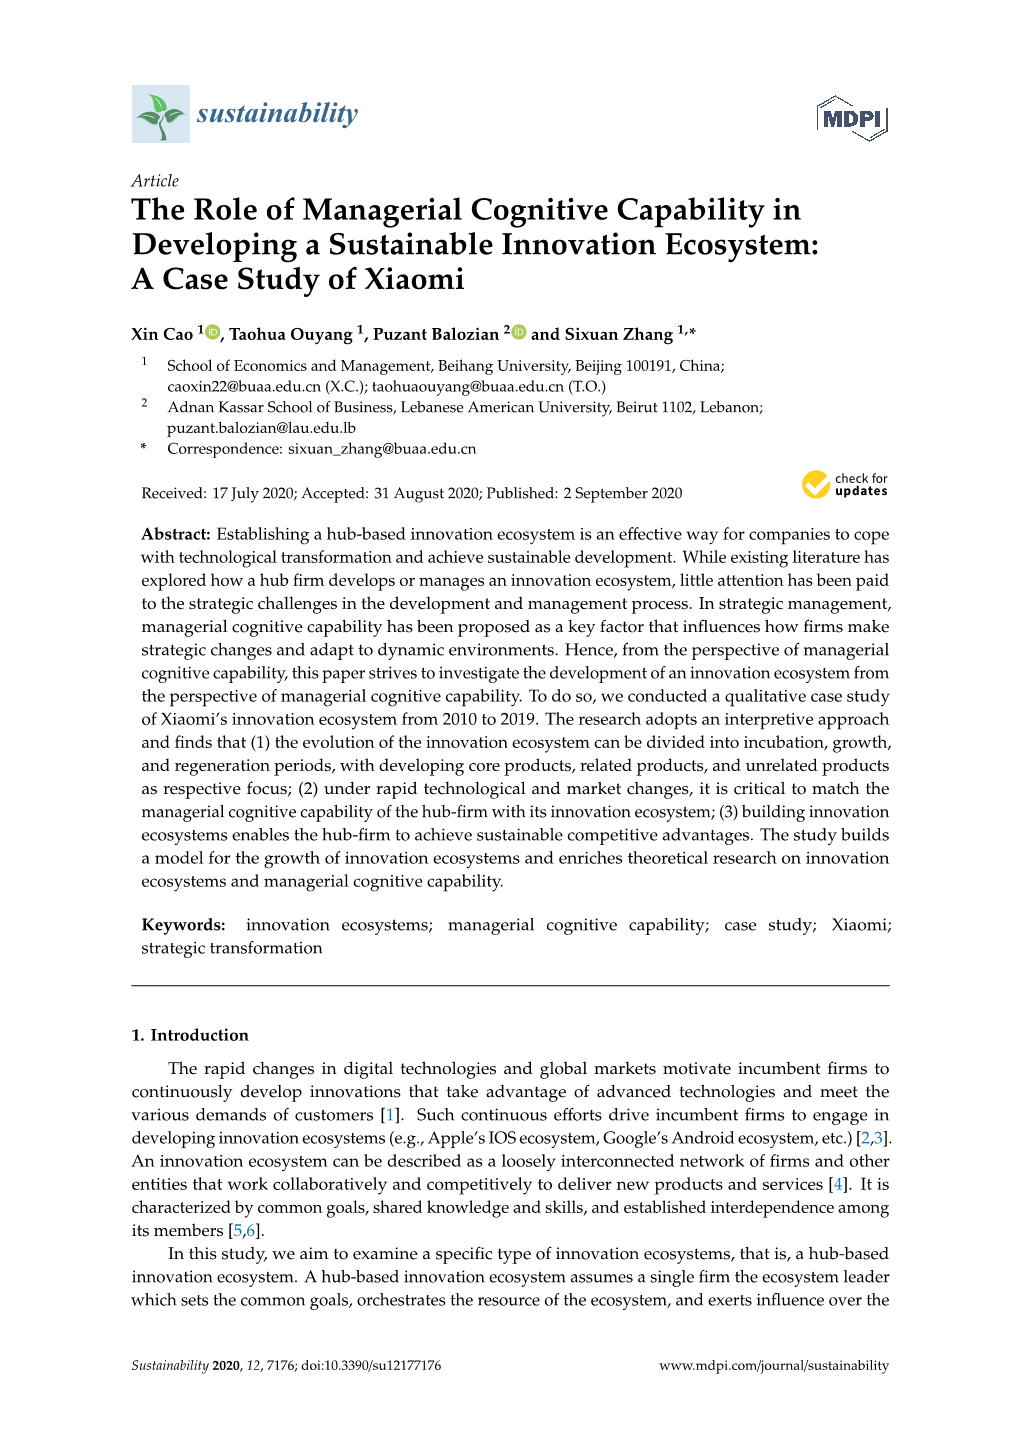 The Role of Managerial Cognitive Capability in Developing a Sustainable Innovation Ecosystem: a Case Study of Xiaomi